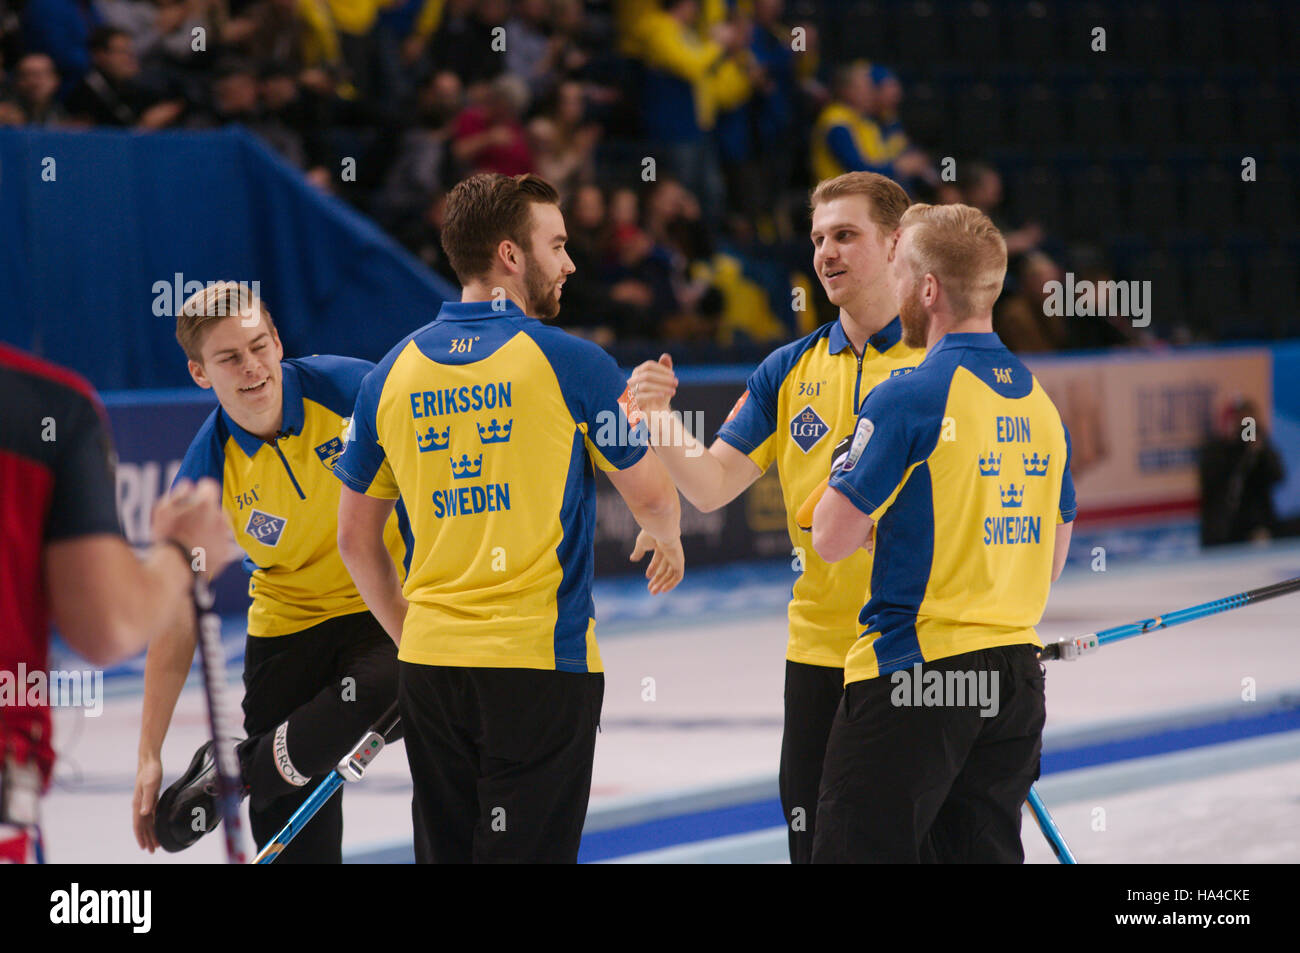 Braehead Arena, Renfrewshire, Scotland, 26 November 2016. Sweden men's team celebrating after beating Norway in the final of the Le Gruyère AOP European Curling Championships 2016  Credit:  Colin Edwards / Alamy Live News Stock Photo